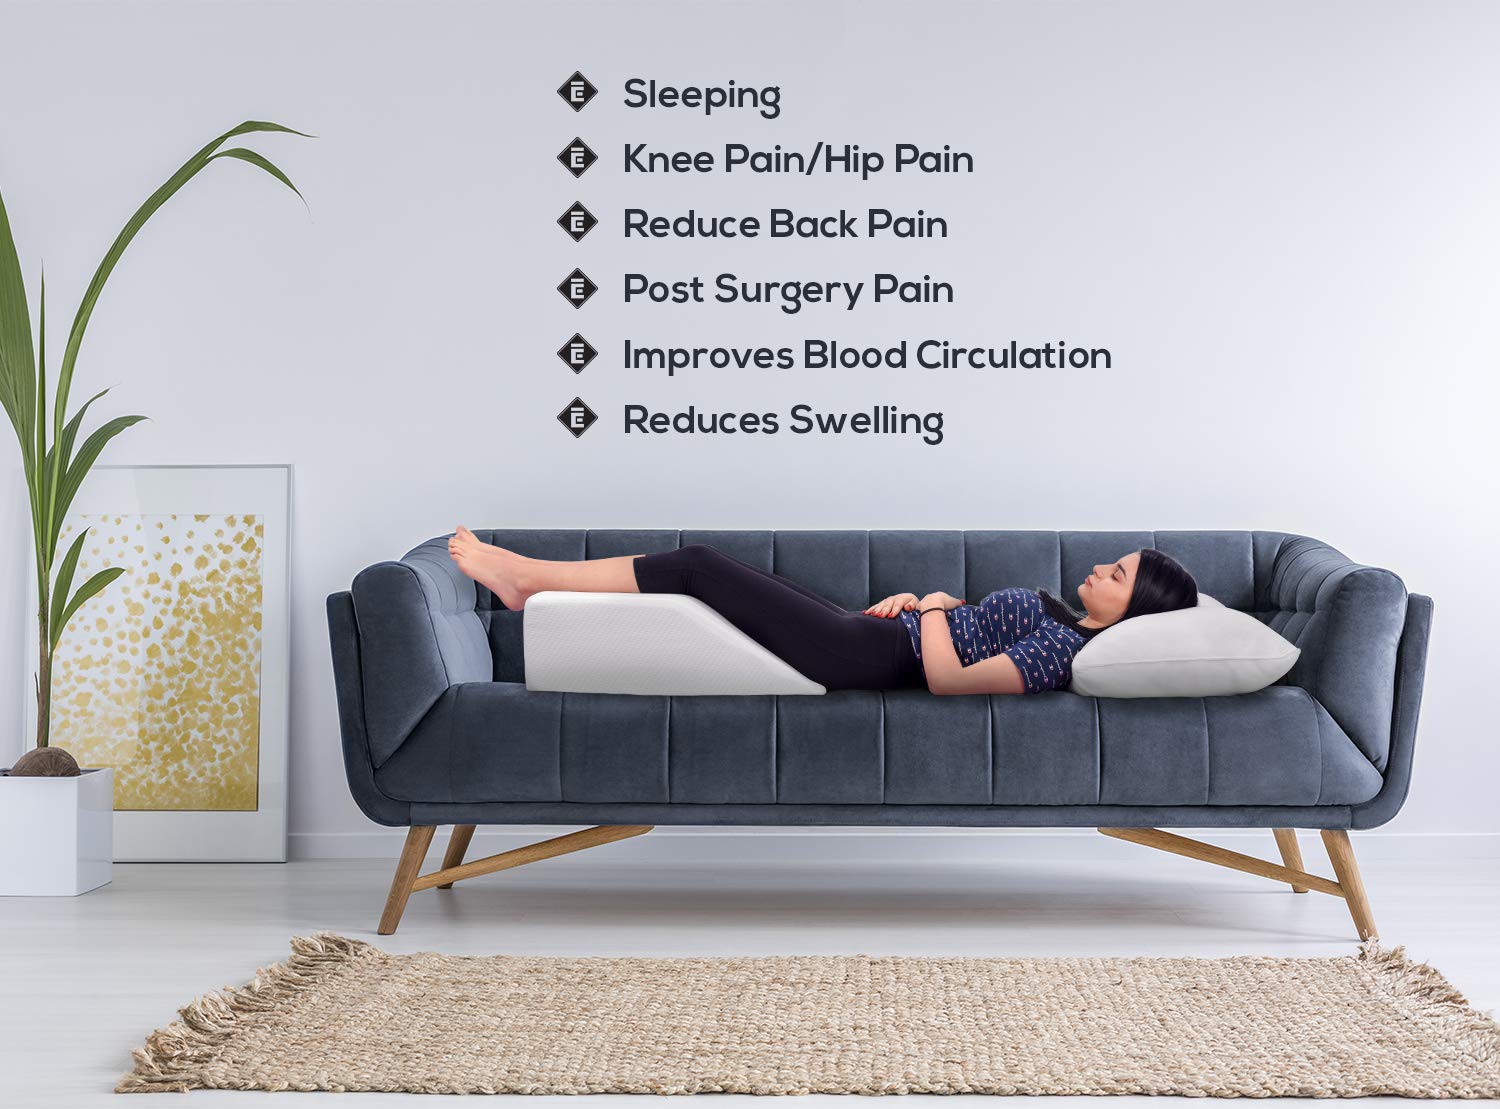 Ebung Memory Foam Leg Elevation Pillows - Leg Support Pillow to Elevate Feet, Sleeping, Blood Circulation, Leg Swelling Relief, Sciatica Pain Relief, Back Pain & Pregnancy - Leg Wedges for Elevation